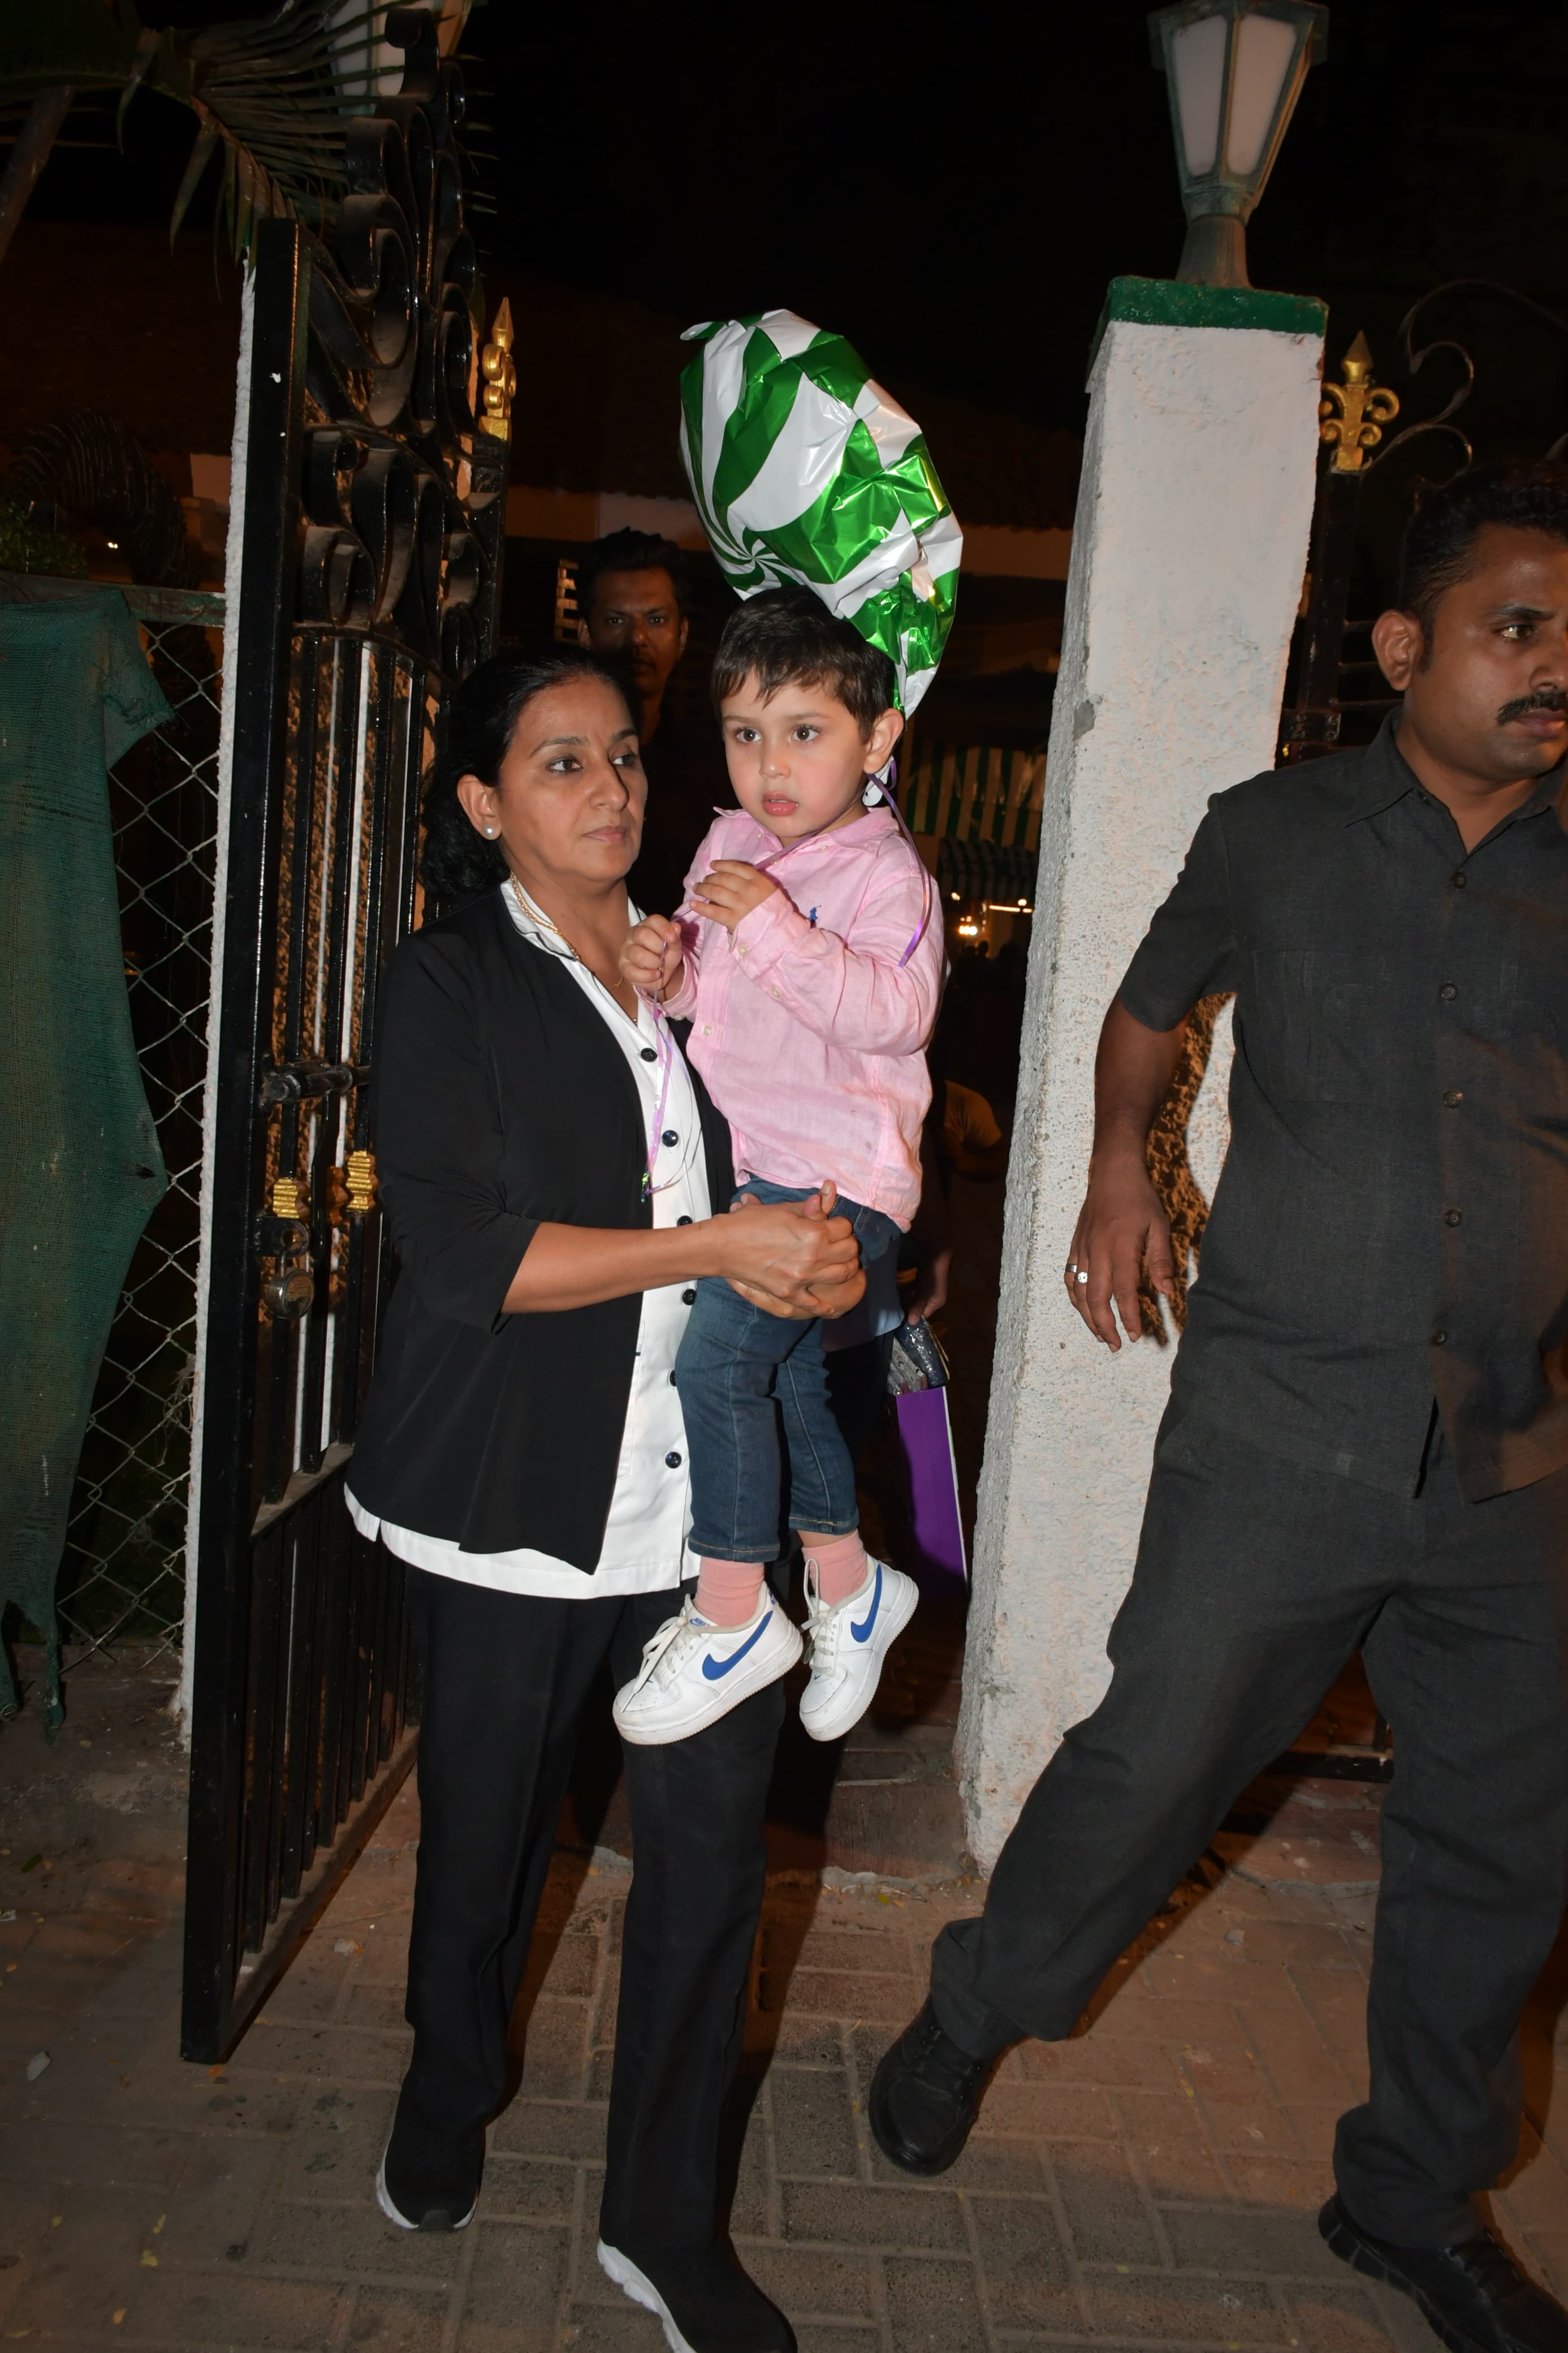 Not to be left out, Jehangir Ali Khan, Kareena Kapoor's youngest son also arrived at the birthday party